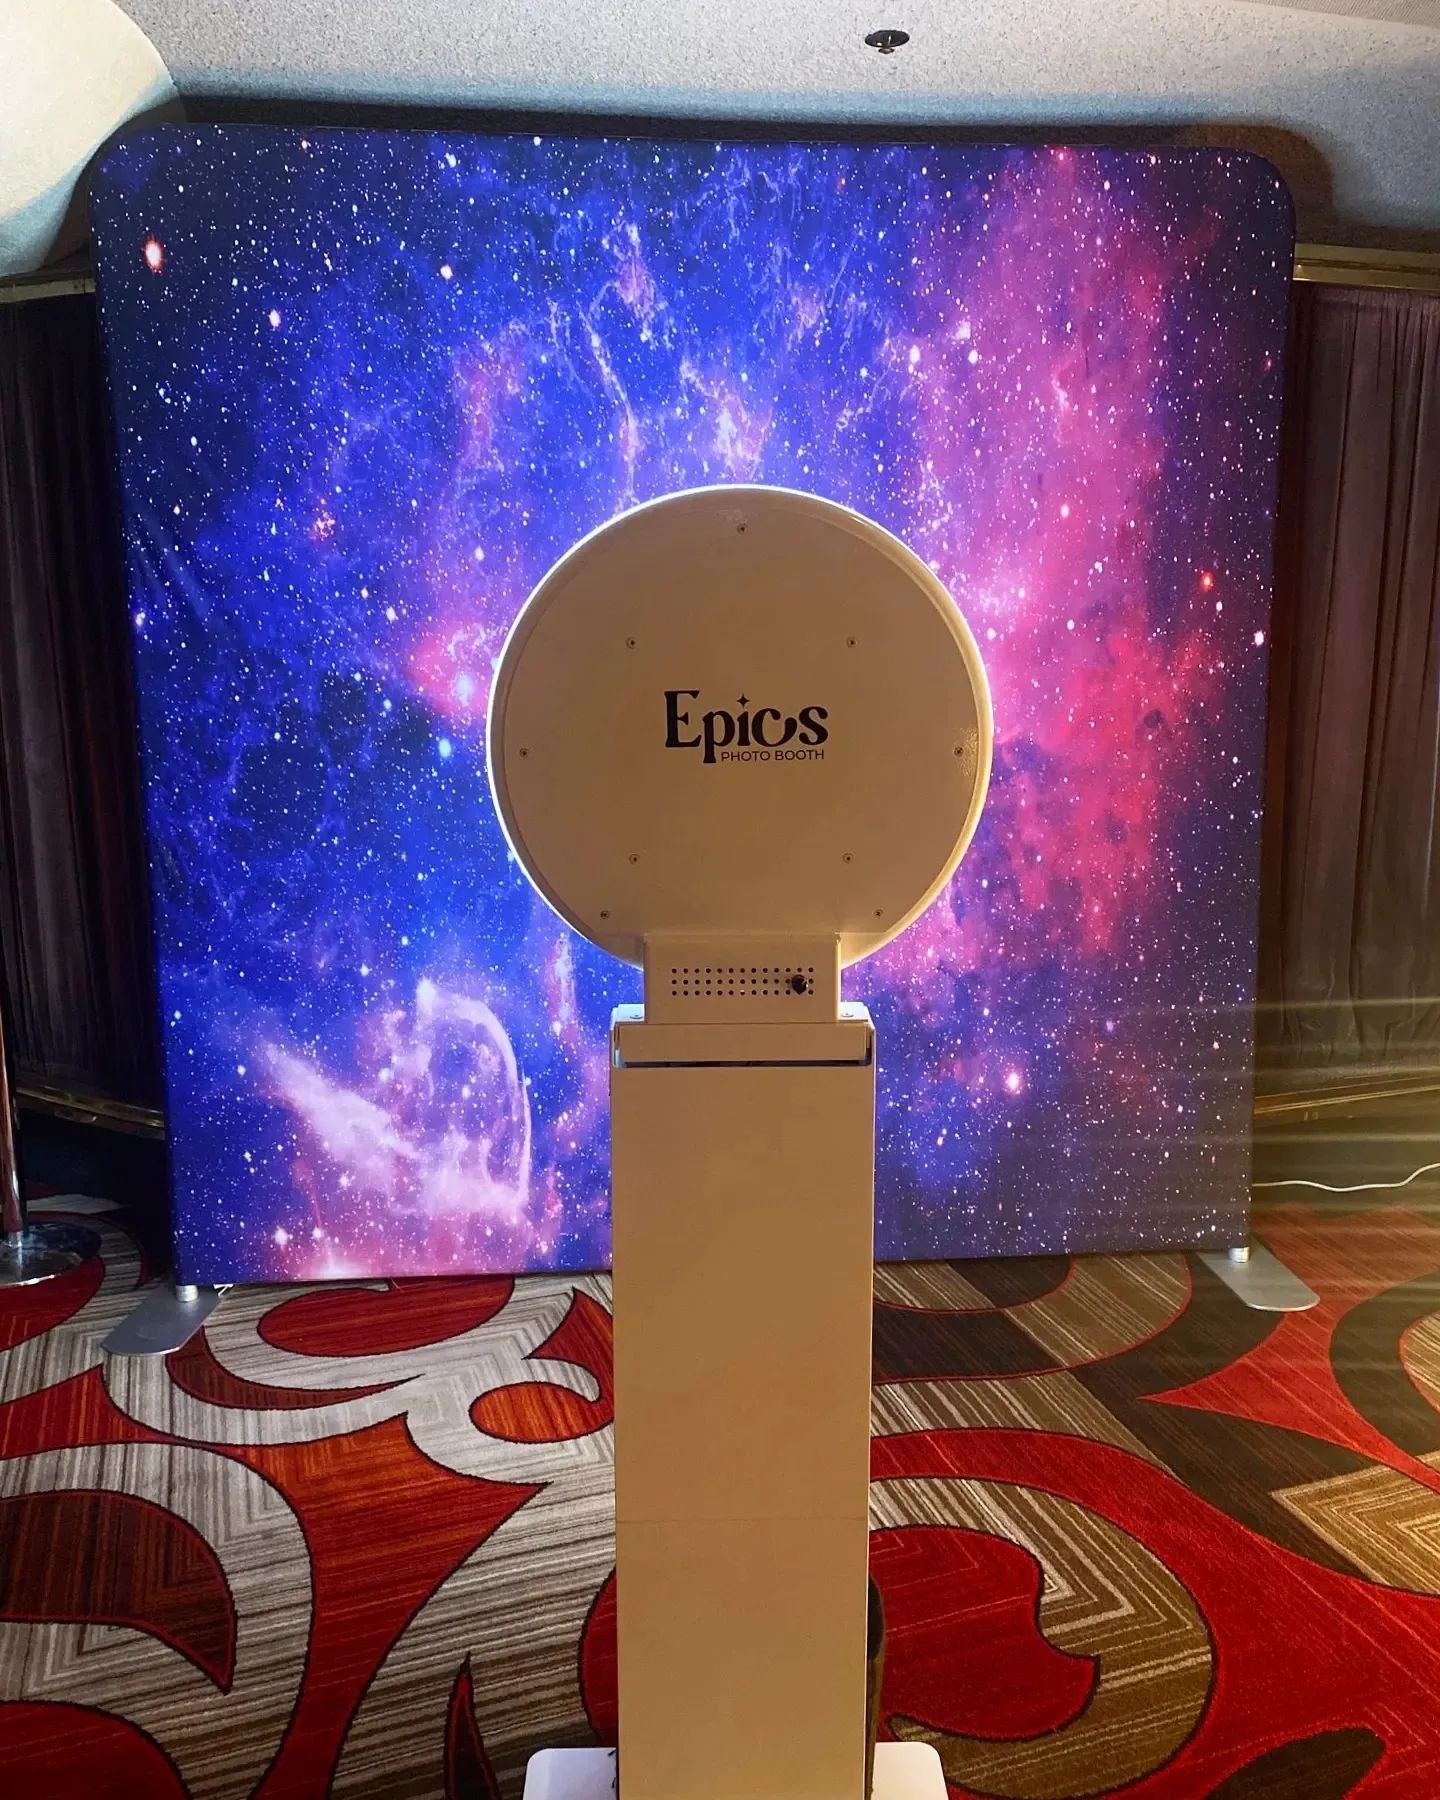 Cosmic canvas 🌌 looking 🔥lately! This backdrop may seem a little much but it really looks stunning and polished in photos! Swipe 👀 to see!
.
.
.
#PhotoBoothReno #RenoPhotoBooth #NuggetCasino #RenoPhotoBoothRental